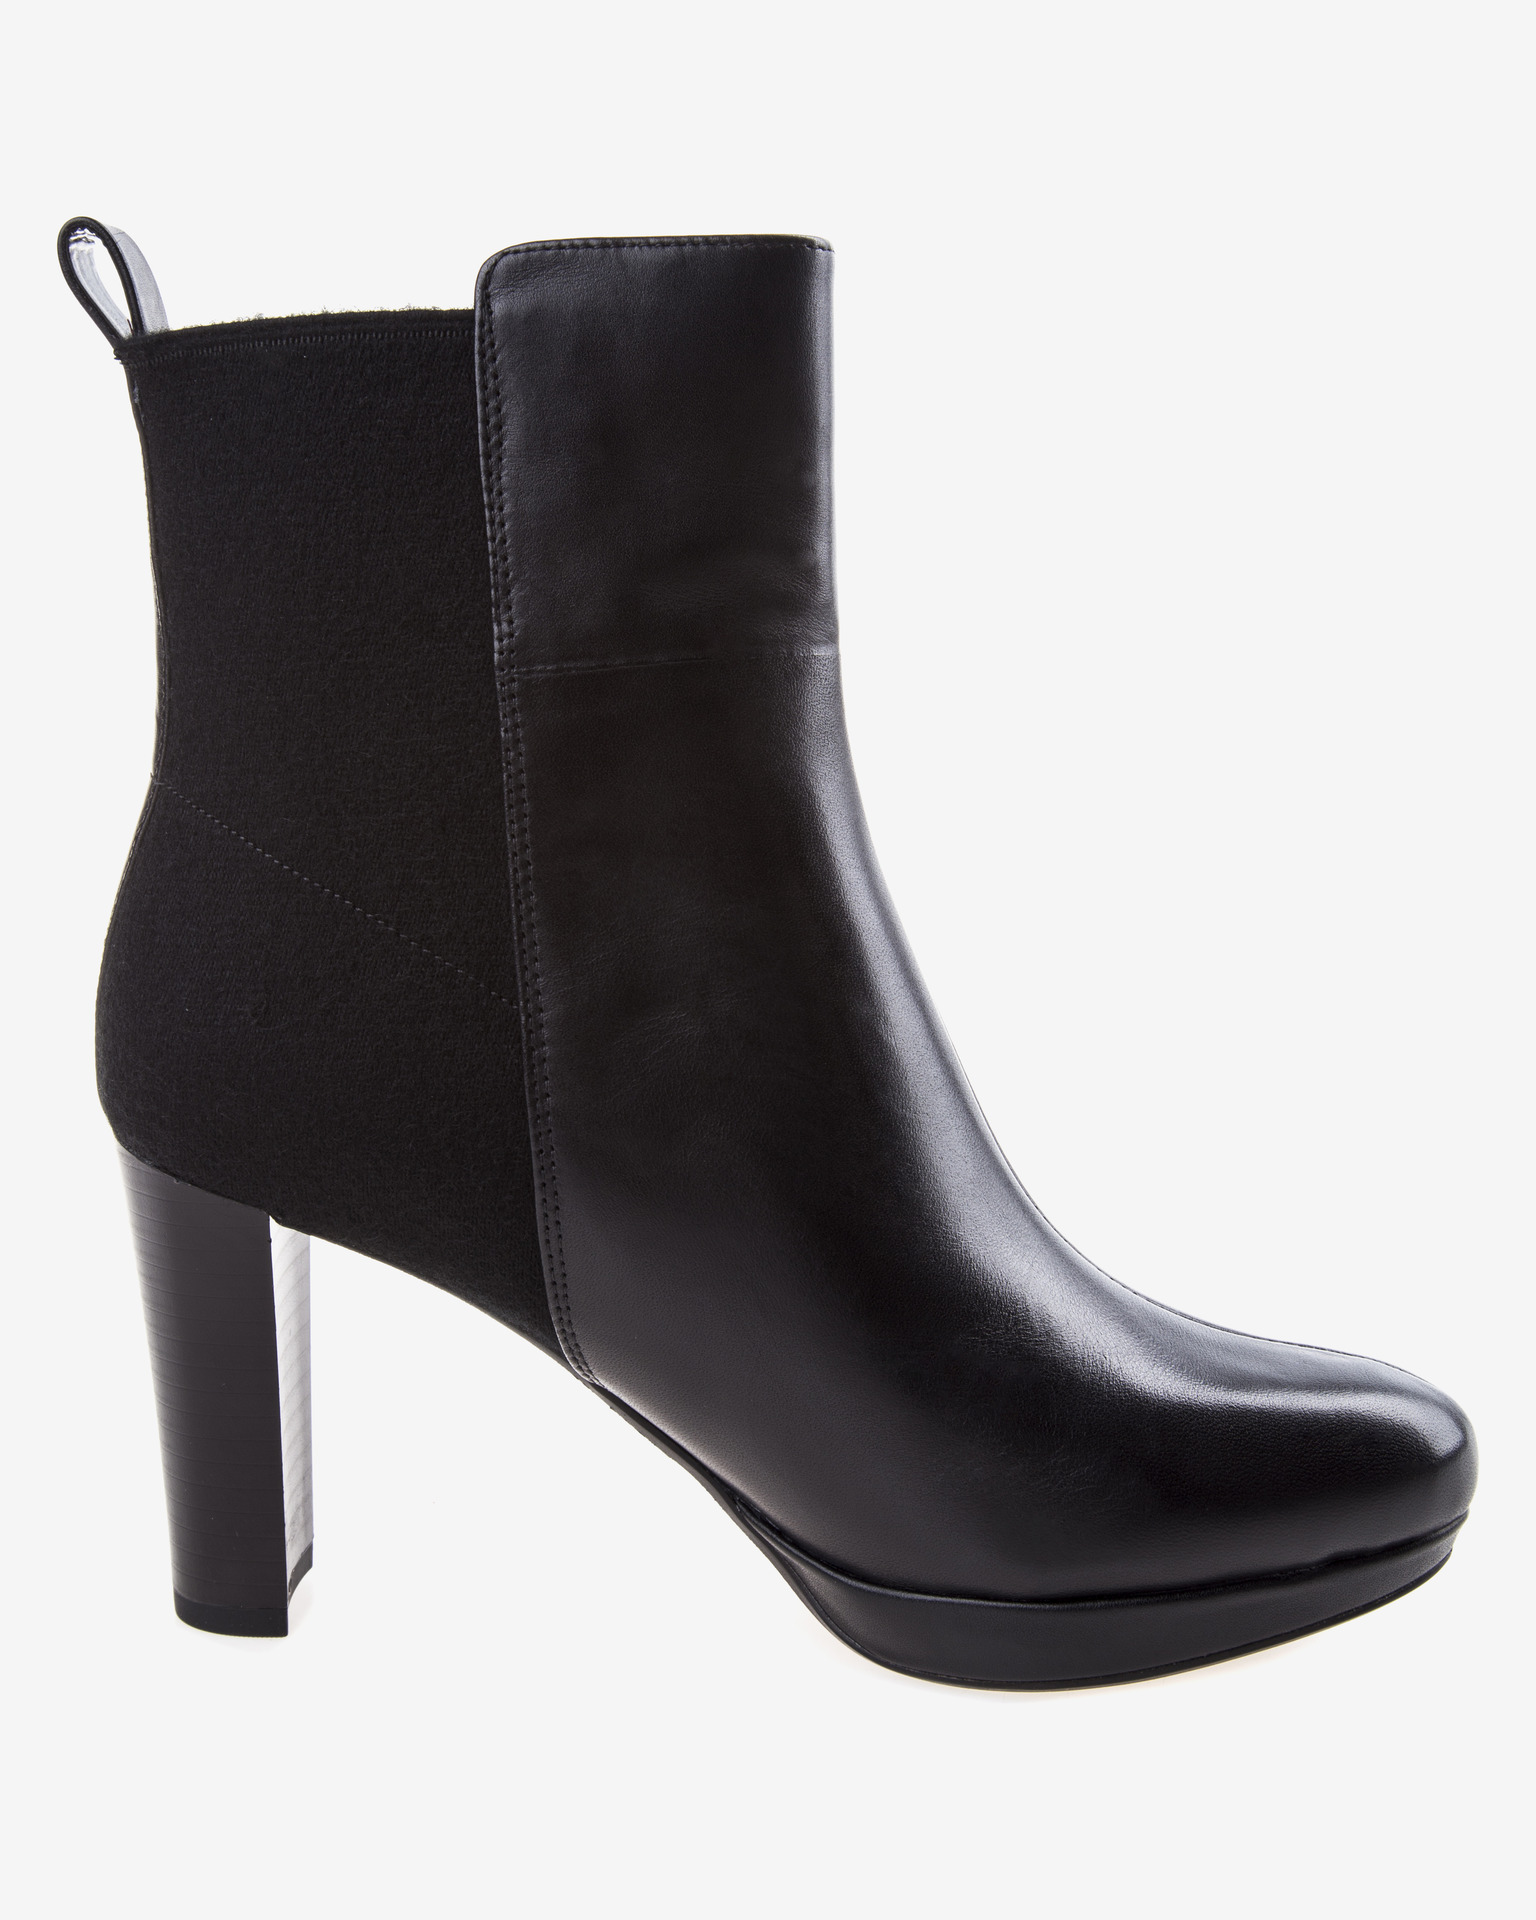 Clarks - Kendra Porter Ankle boots 